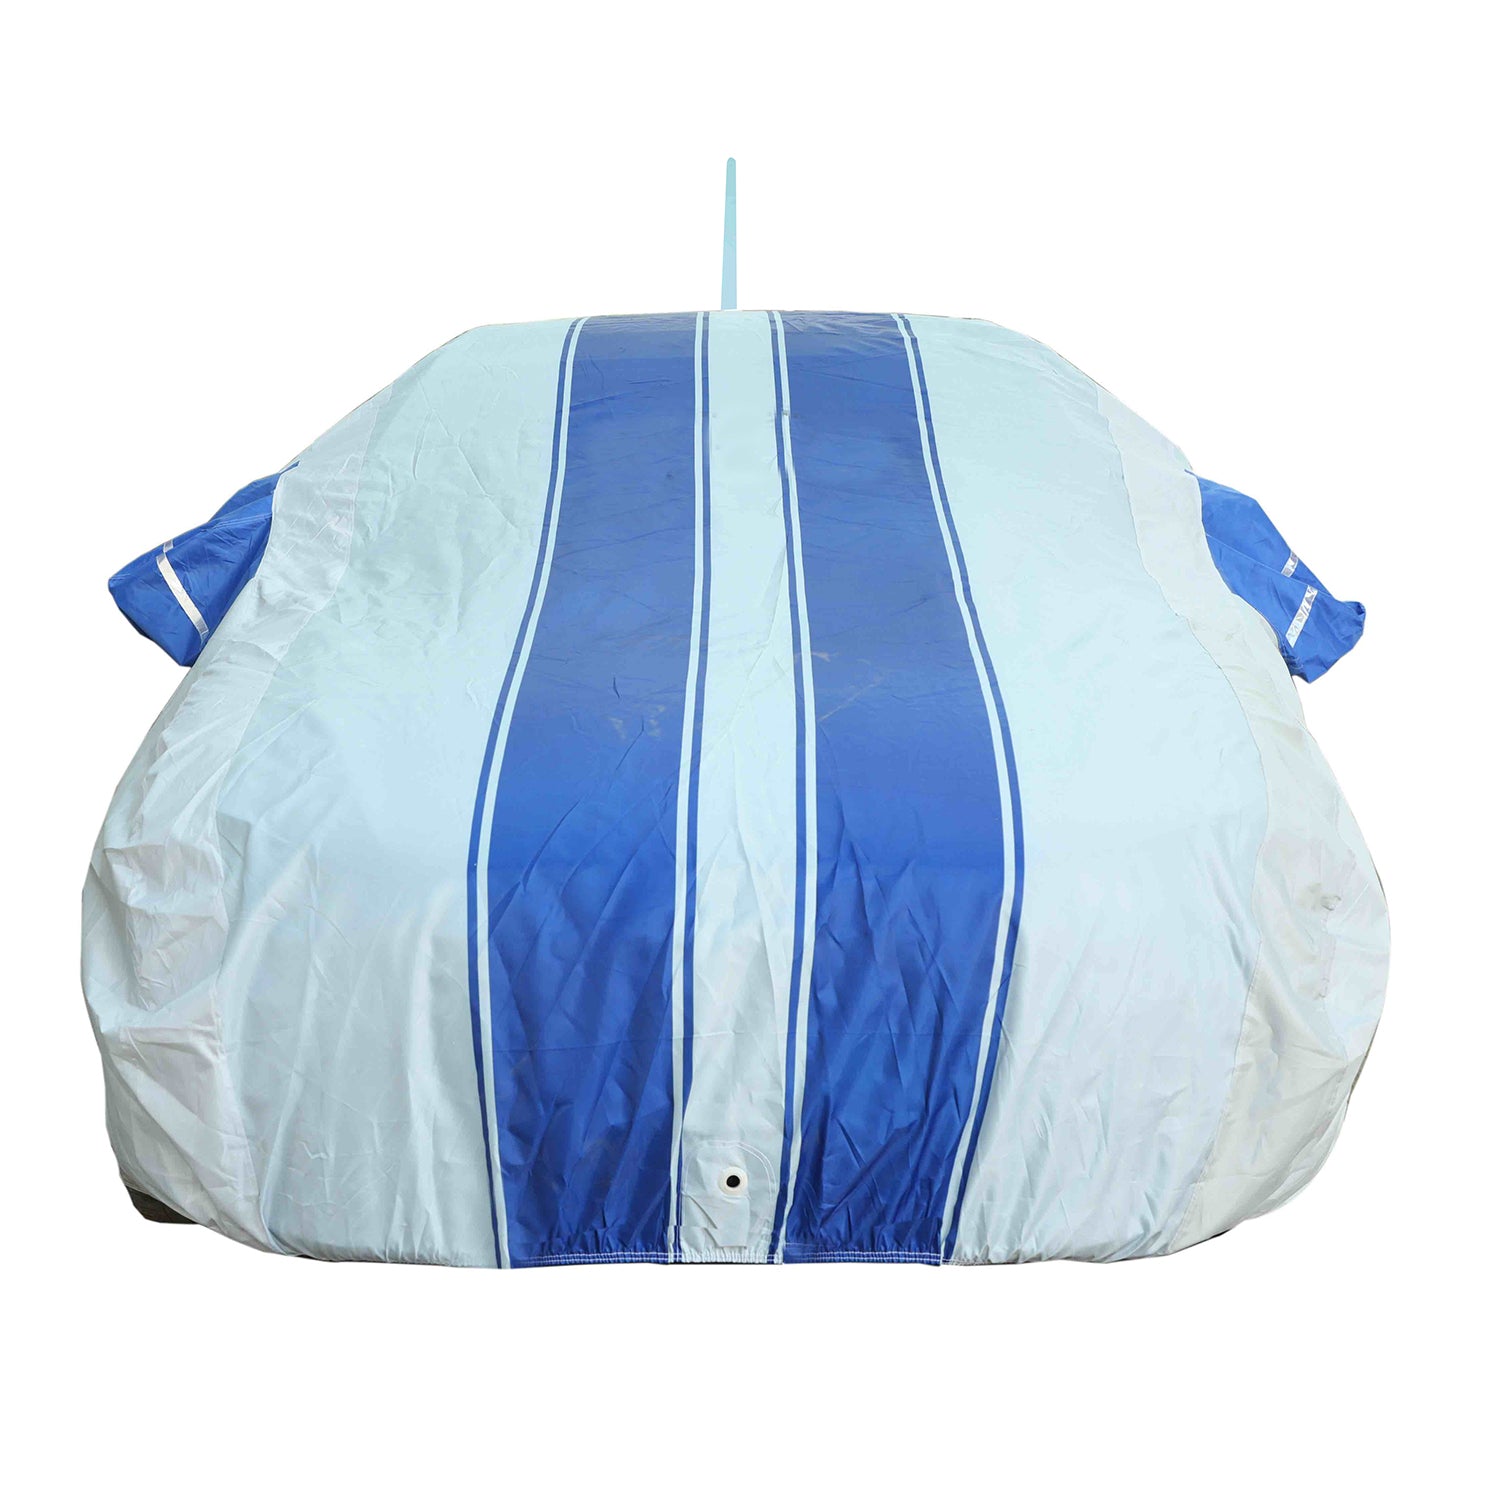 Oshotto 100% Blue dustproof and Water Resistant Car Body Cover with Mi